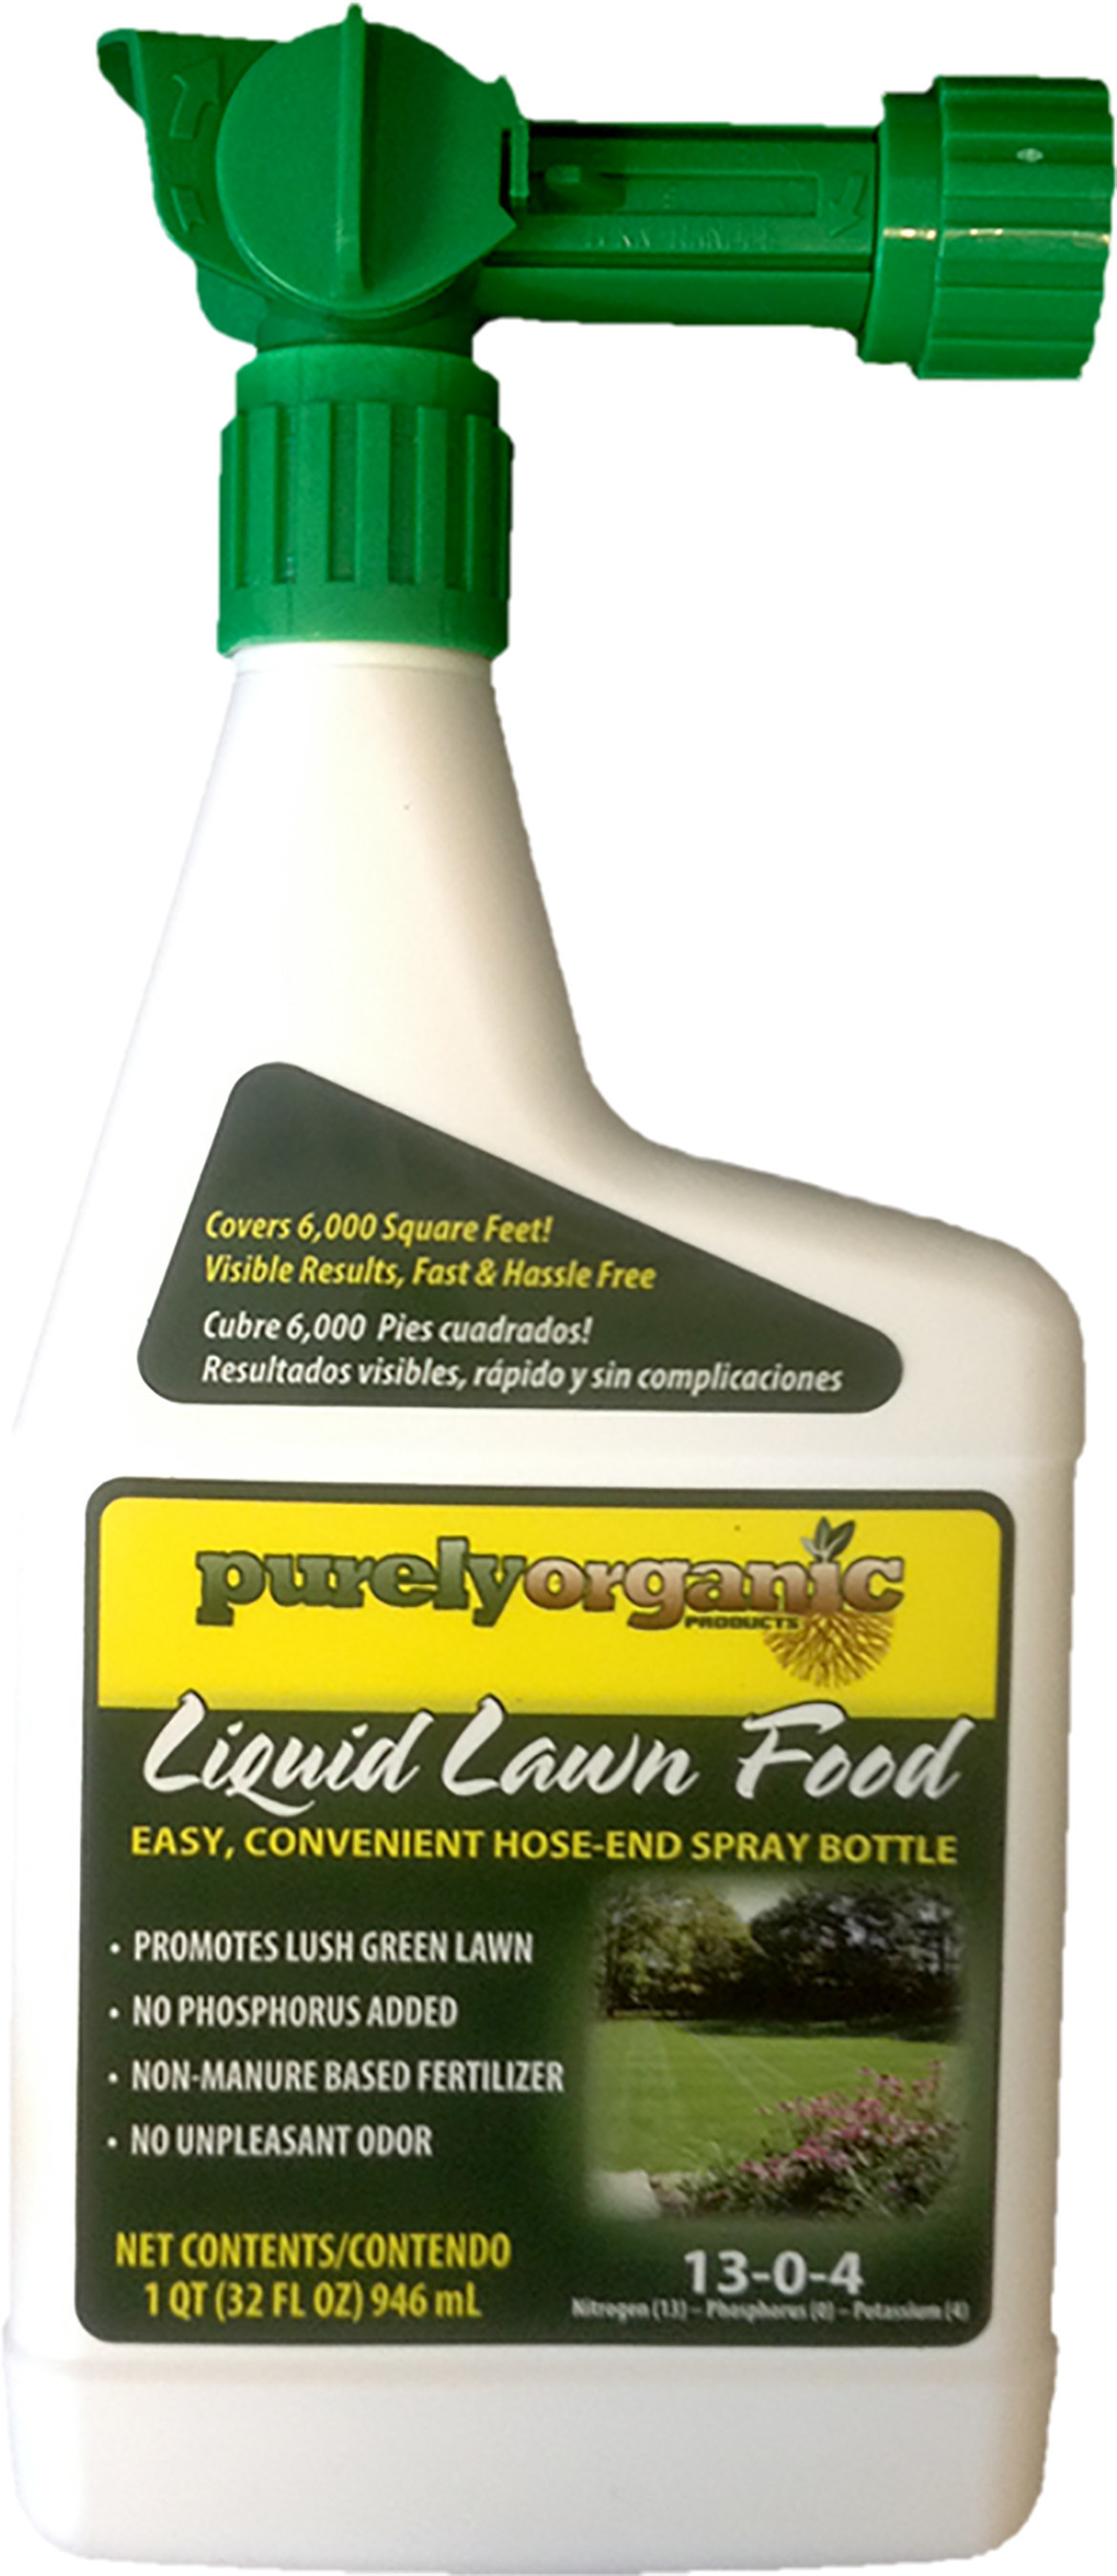 Purely Organic Products, LLC, Liquid Lawn Food, natural fertilizer is now available at The Home Depot stores nationwide.